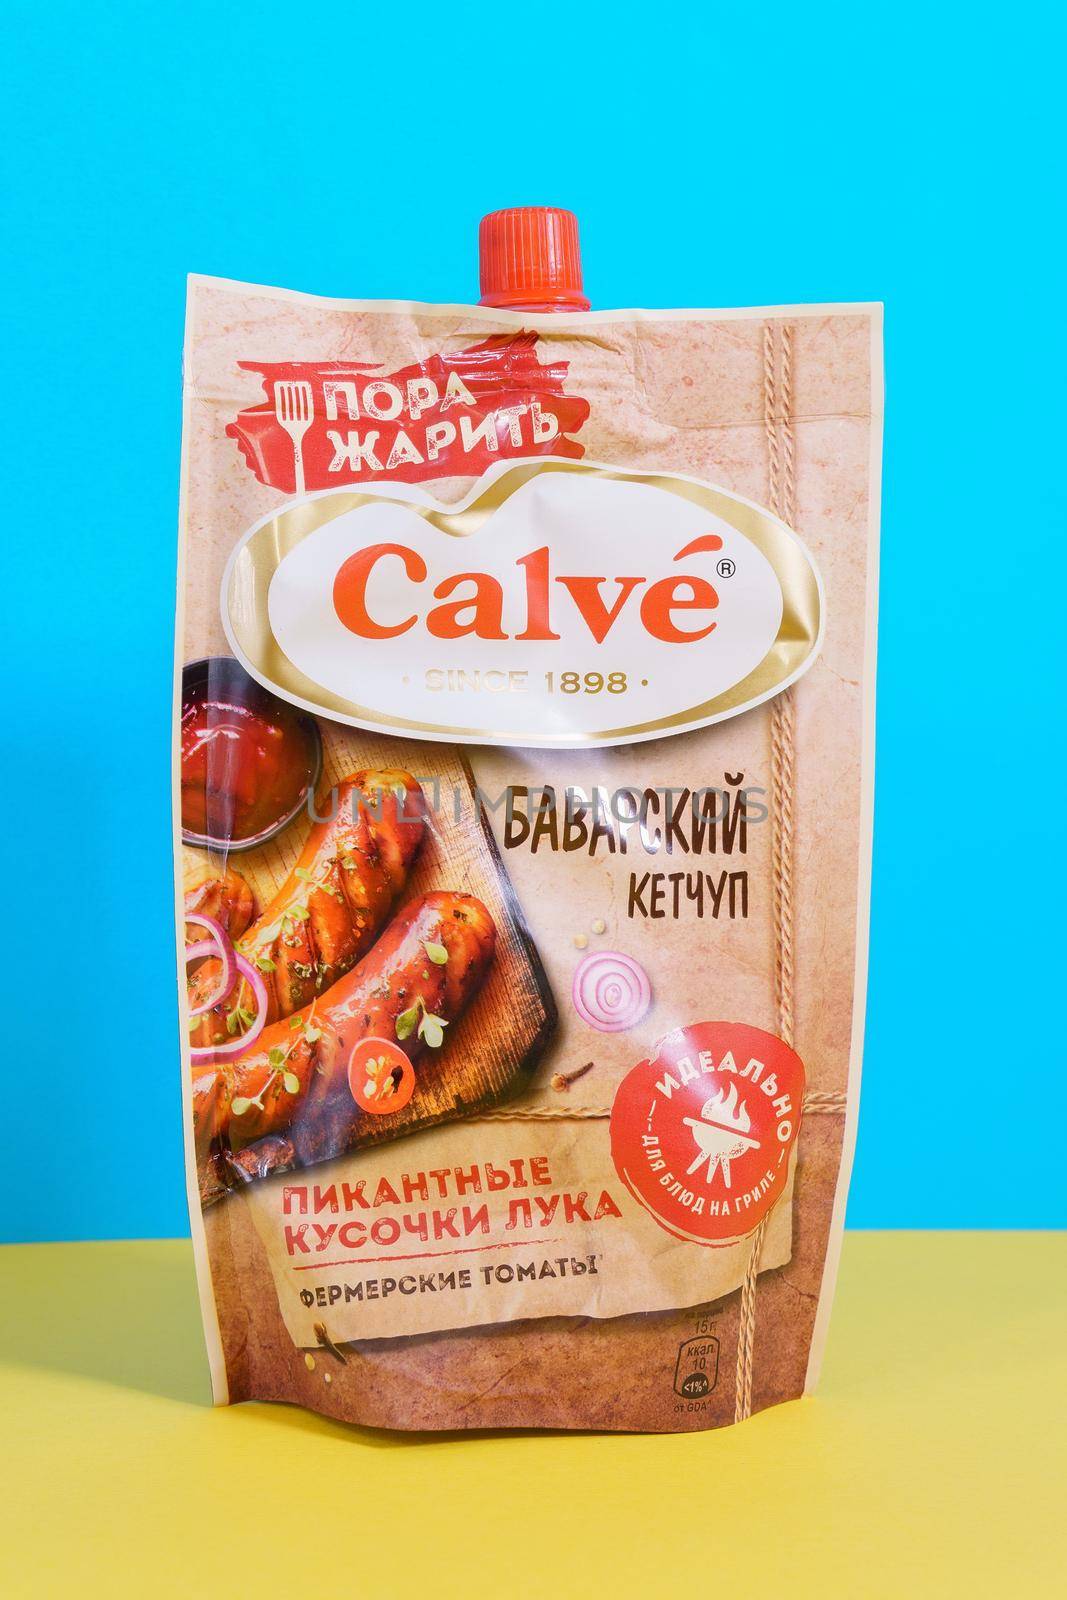 Tyumen, Russia-april 17, 2021: Calve Bavarian ketchup on a yellow blue background. russian packaging by darksoul72